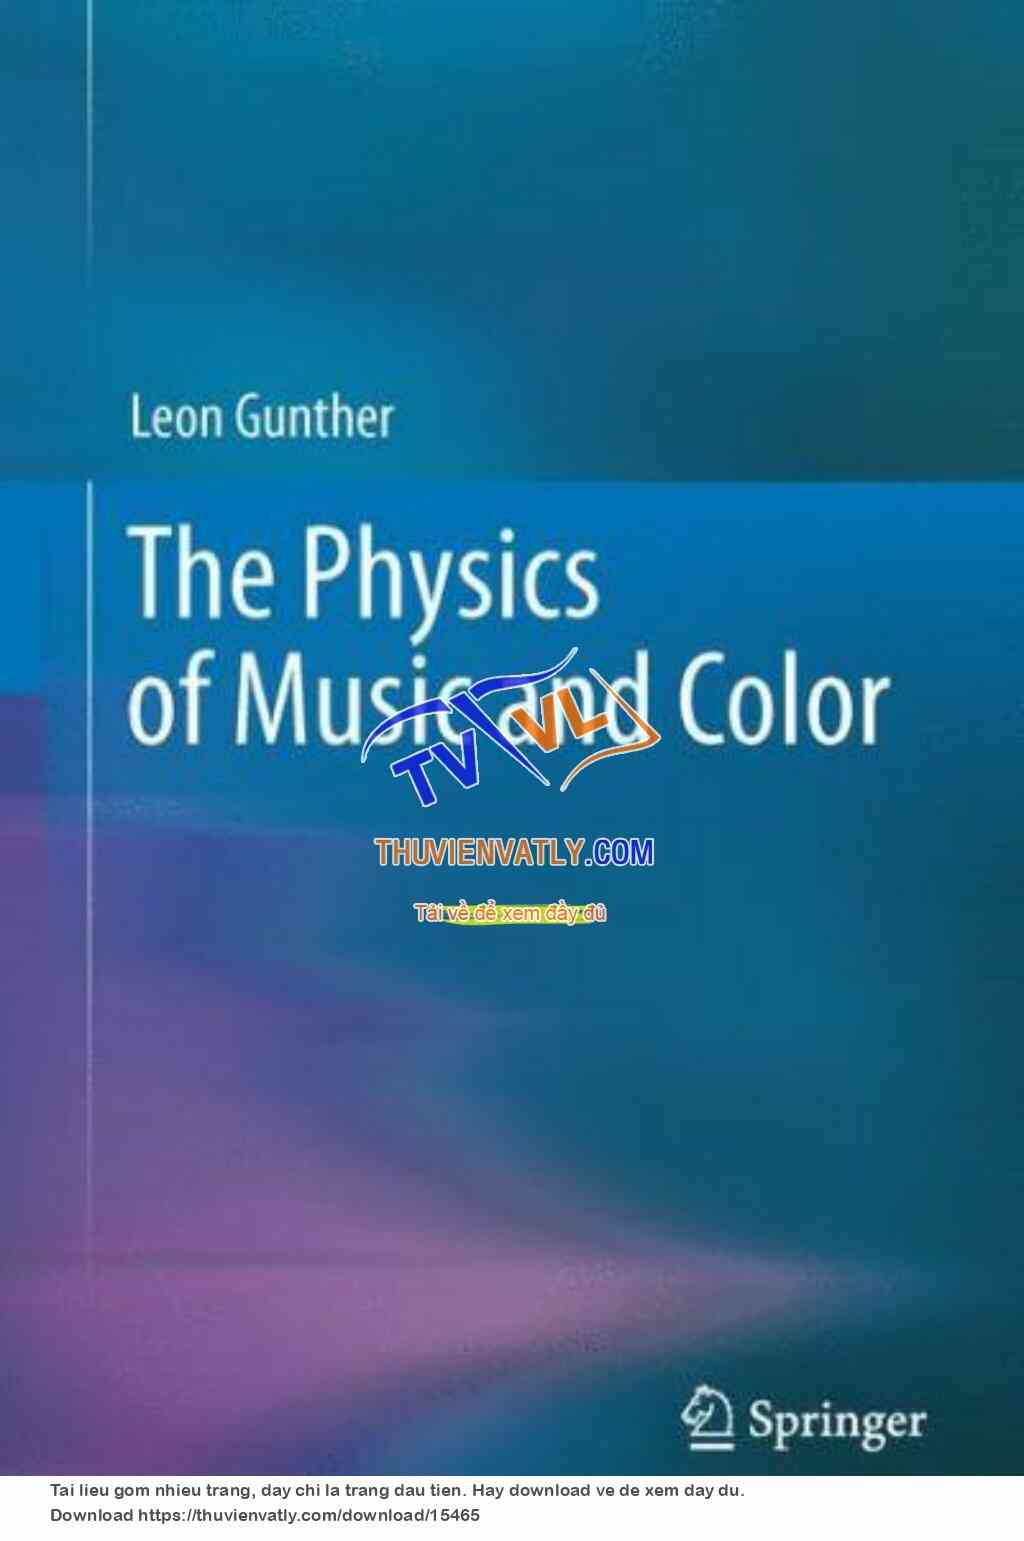 The Physics of Music and Color - L. Gunther (Springer, 2012)